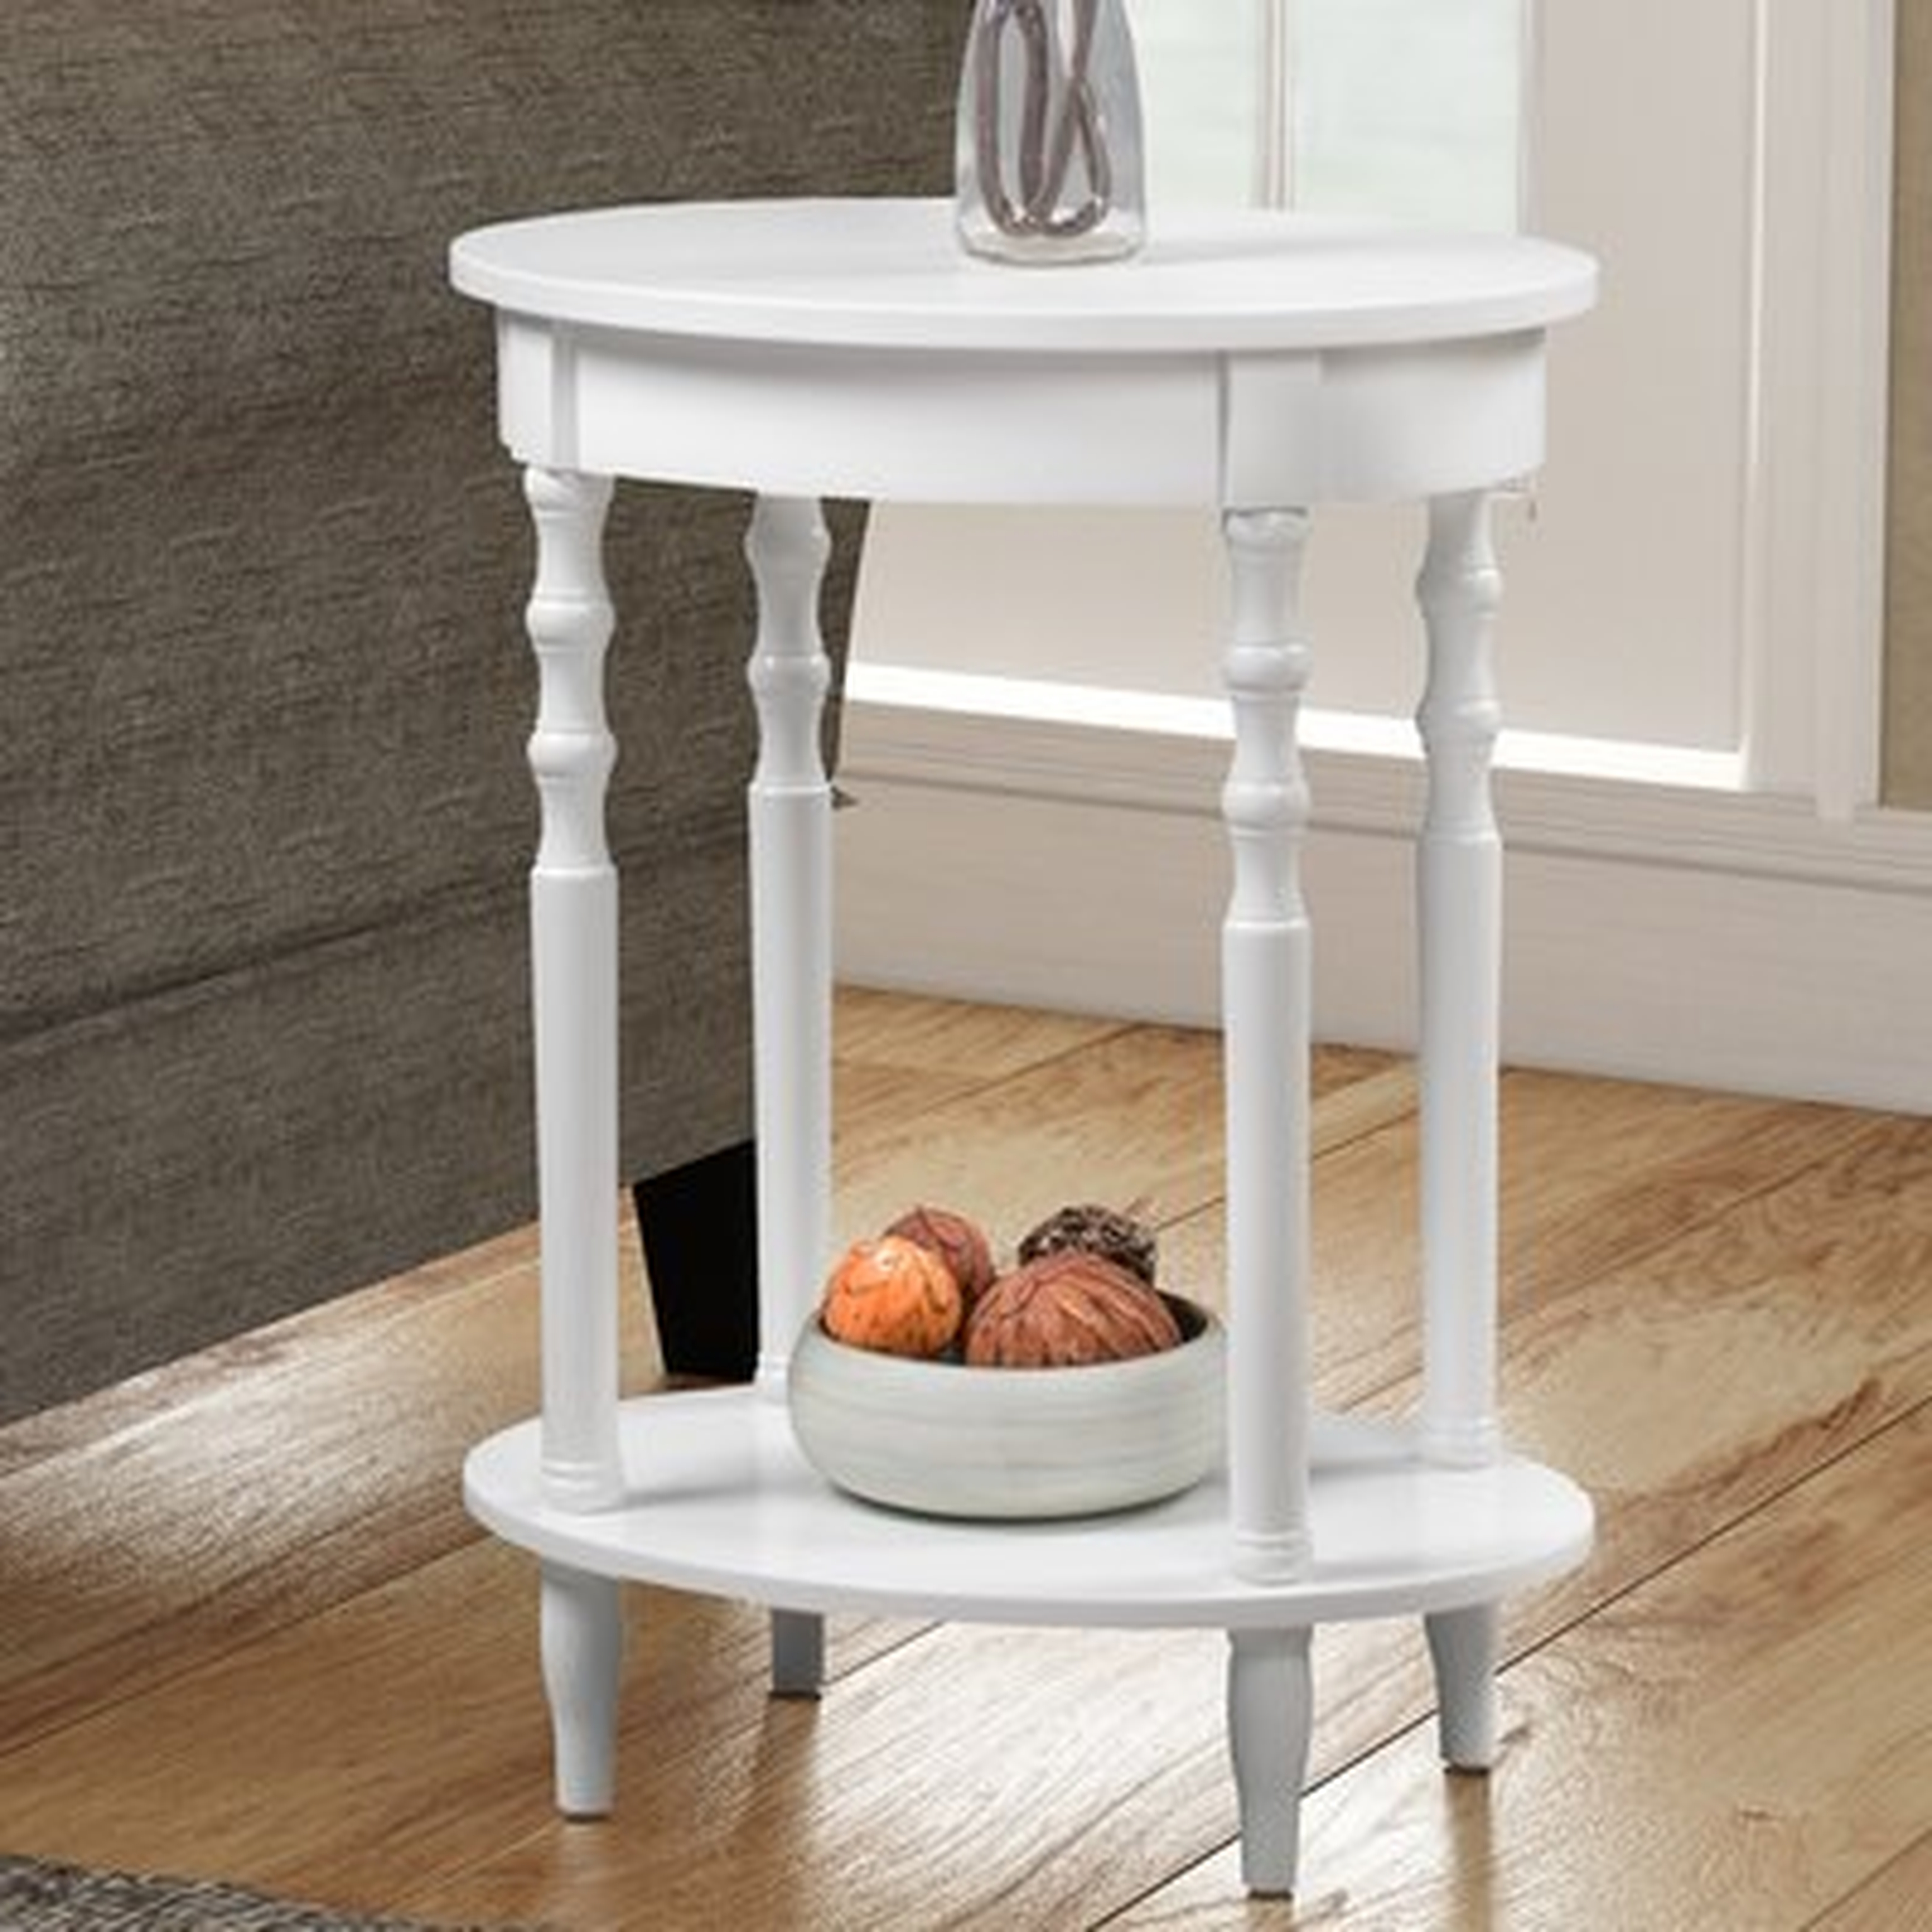 Moravian Classic Accents Tray Table - Wayfair